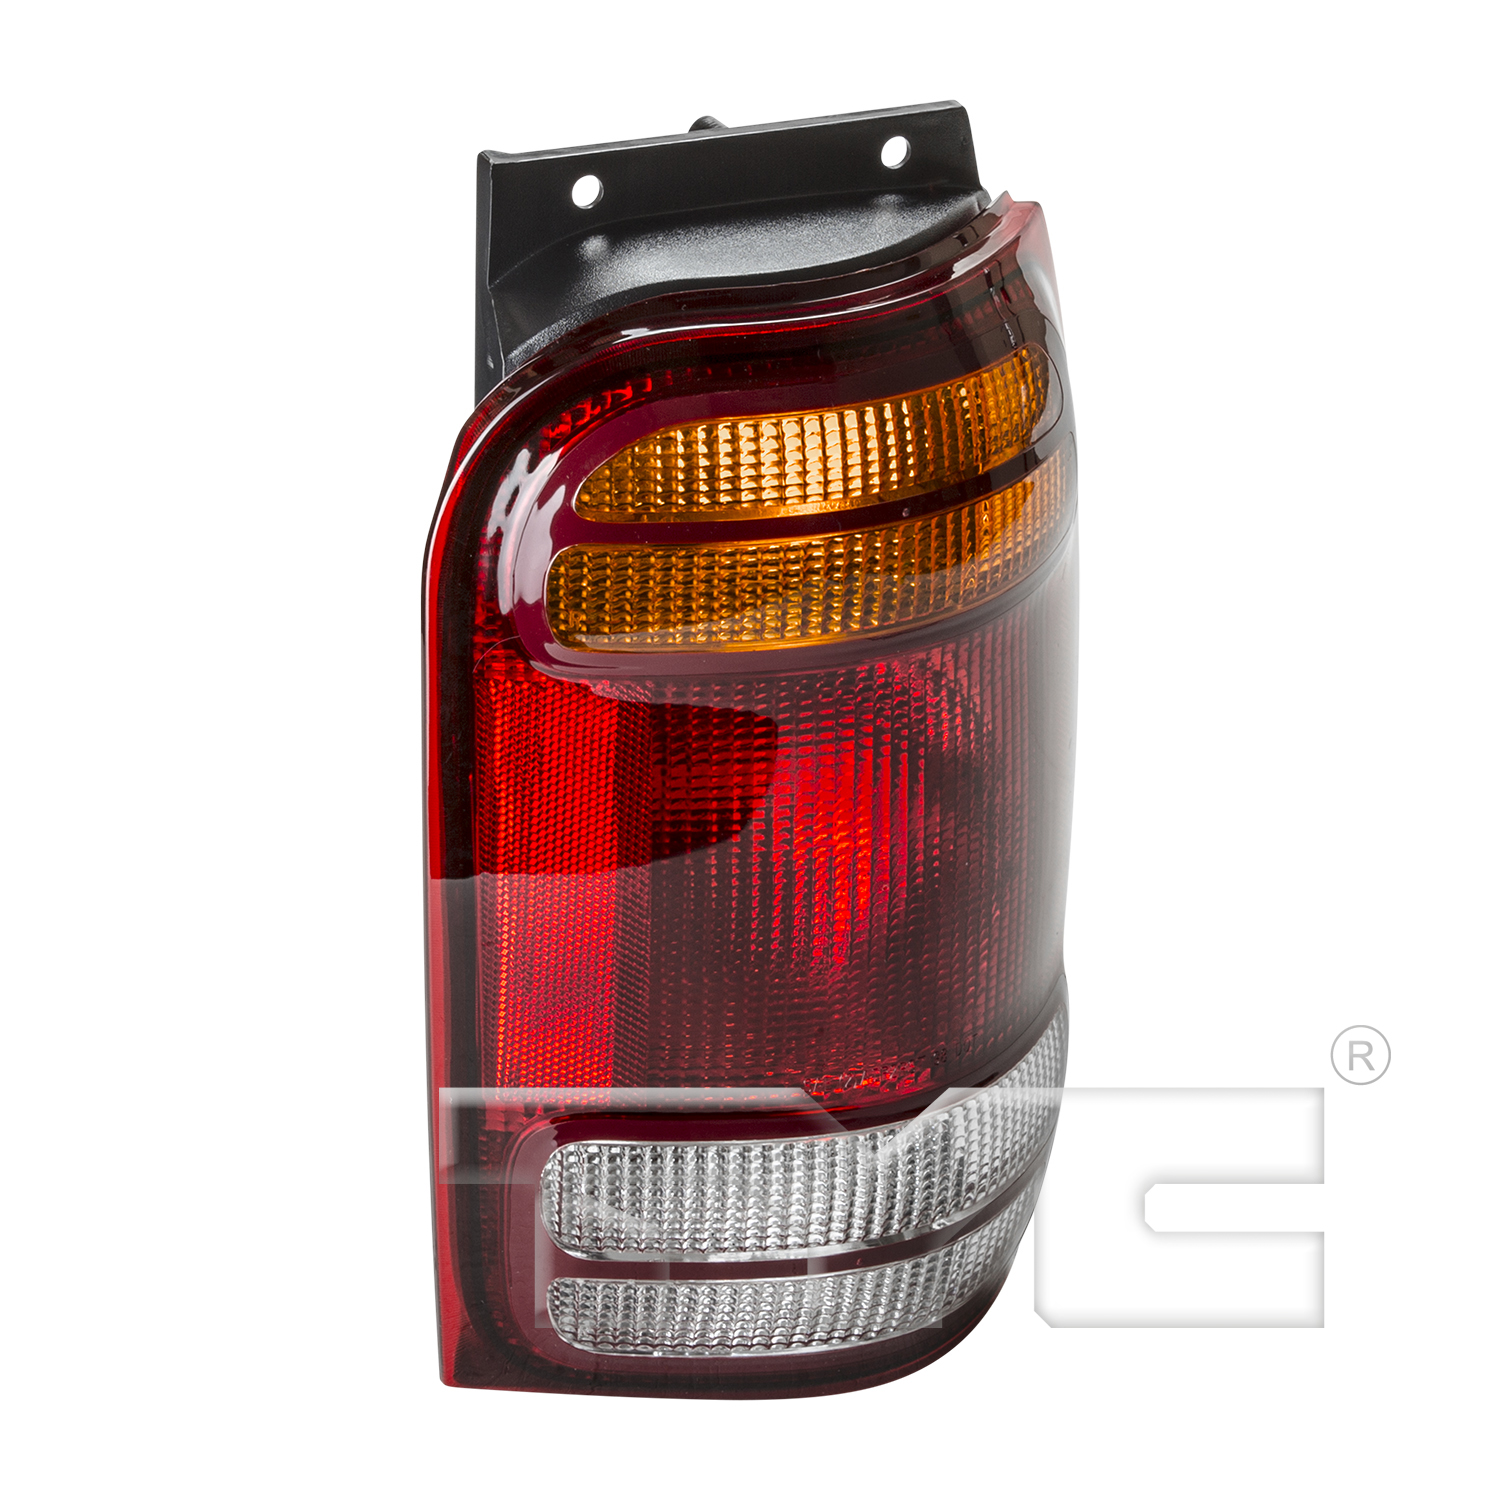 Aftermarket TAILLIGHTS for FORD - EXPLORER, EXPLORER,98-00,RT Taillamp assy